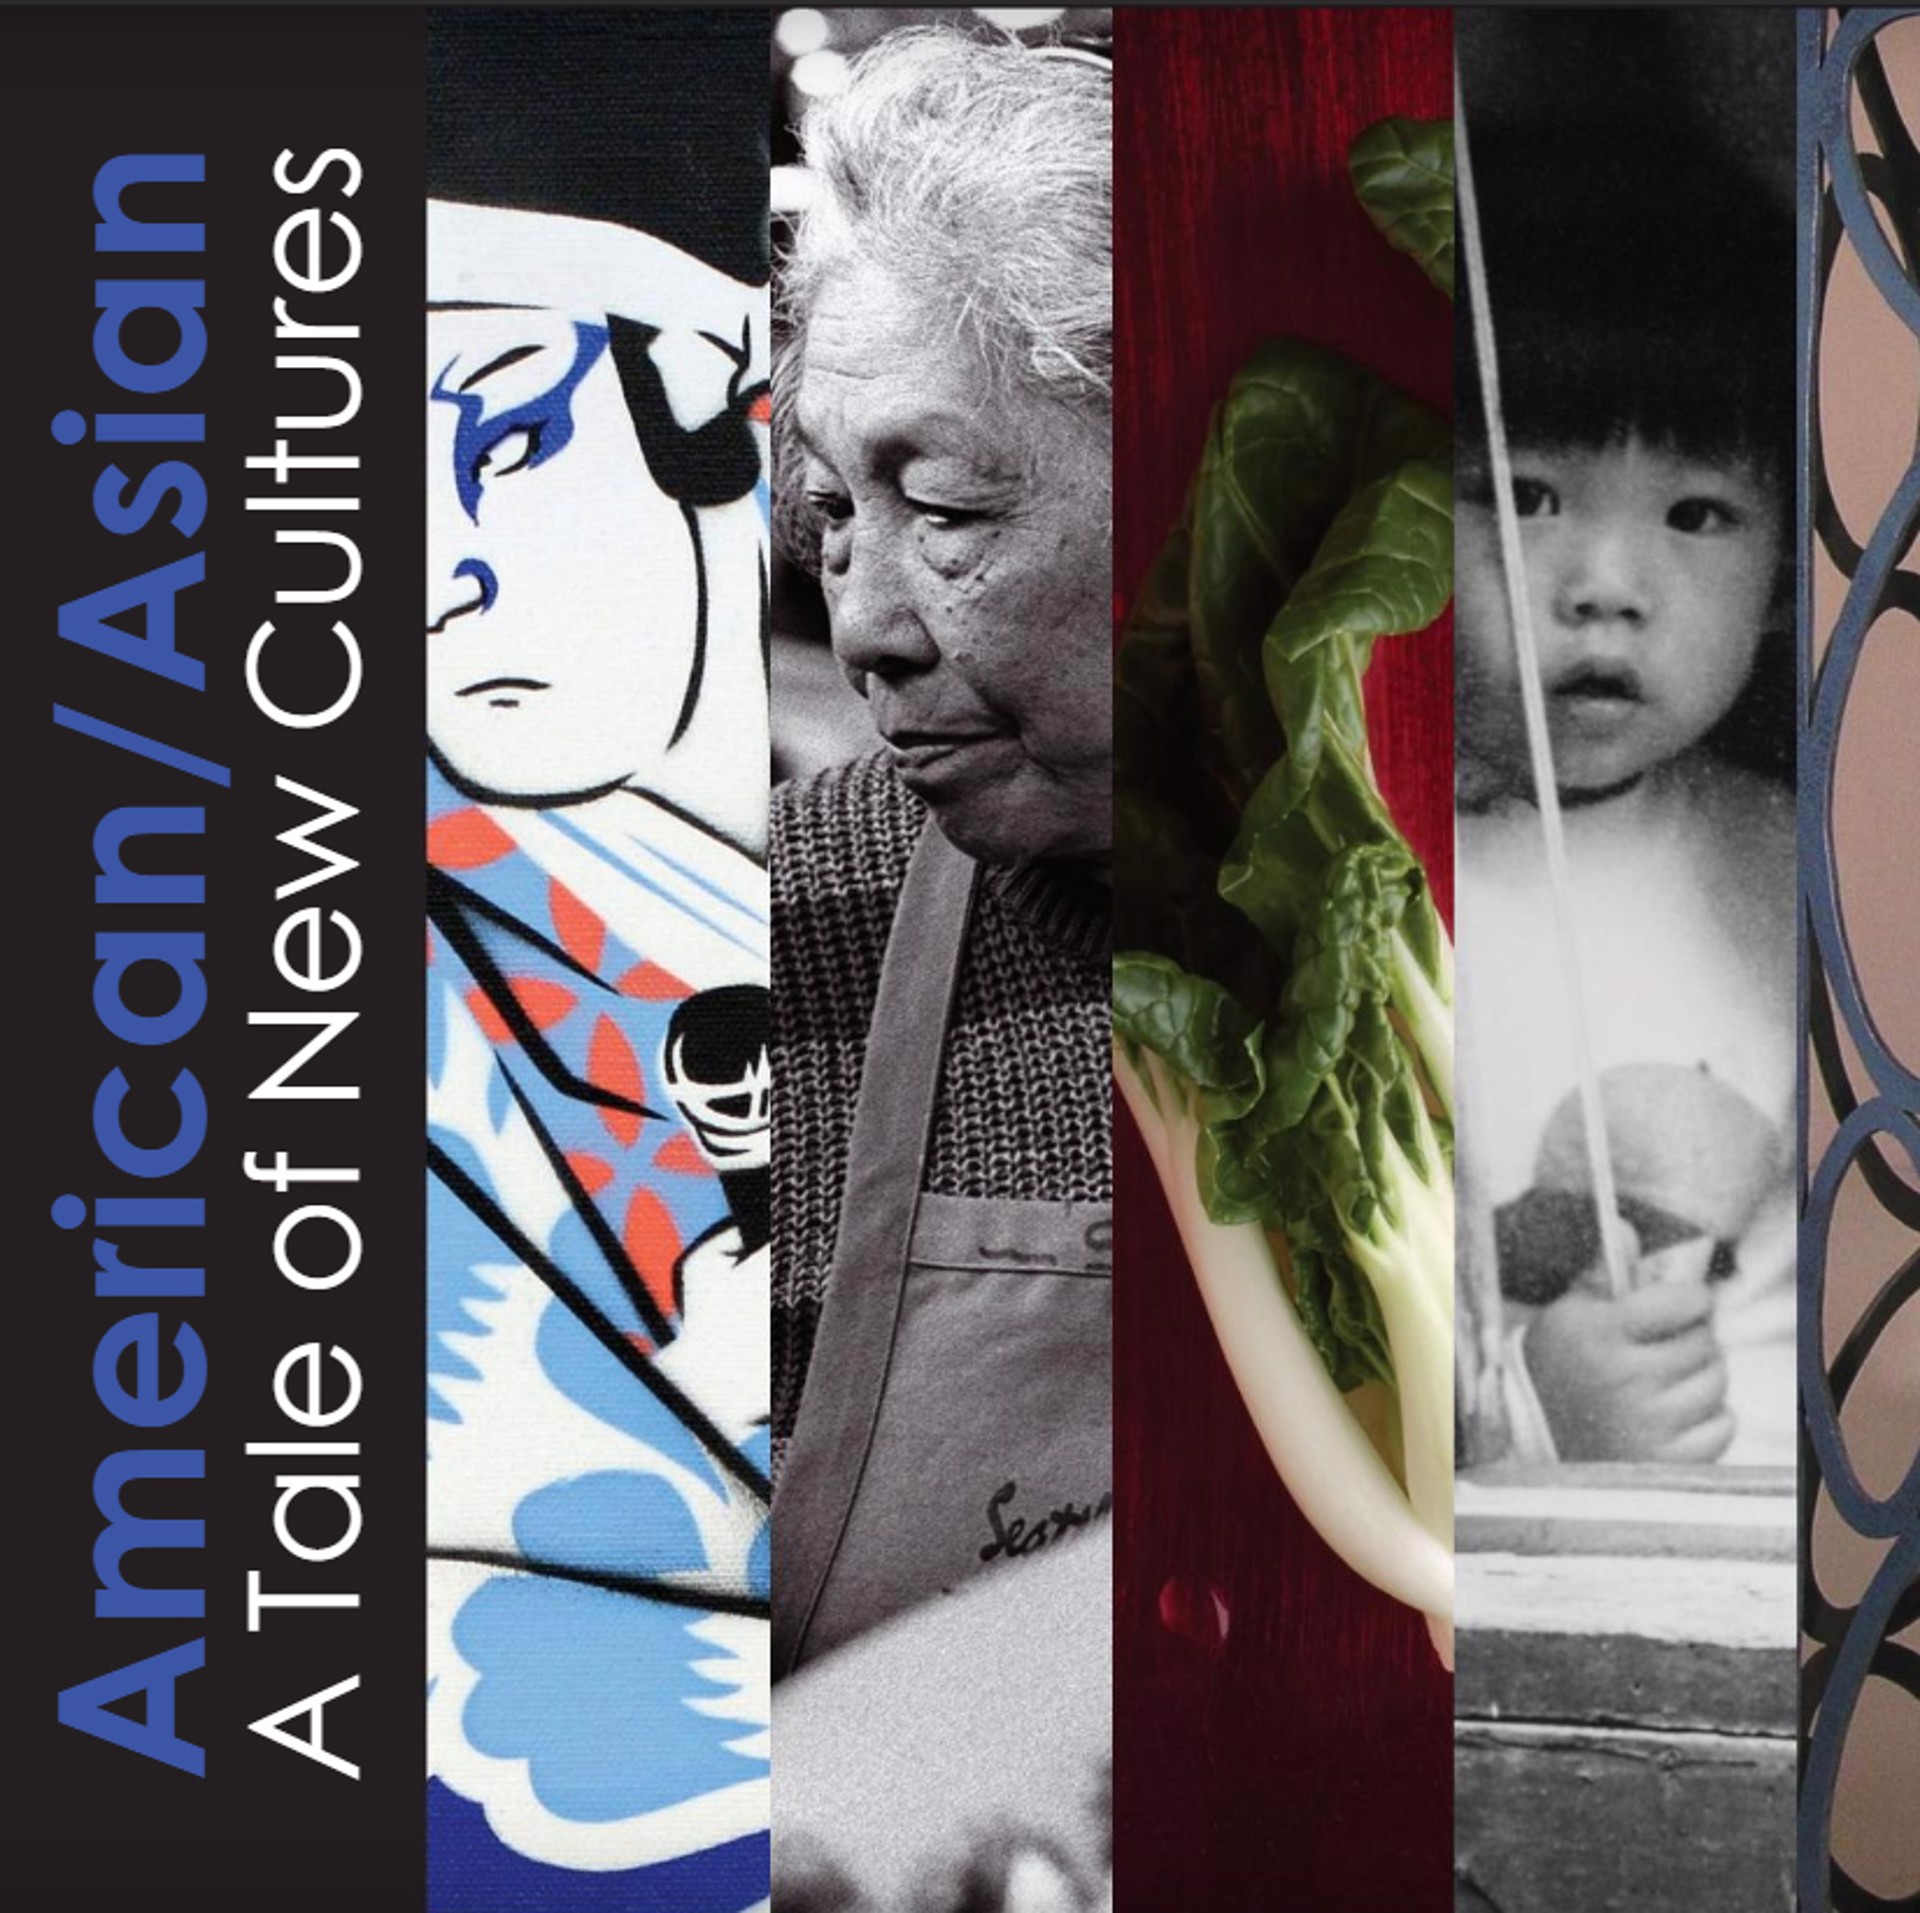 American/Asian: A Tale of New Cultures | Exhibition Catalog by ArtXchange Gallery